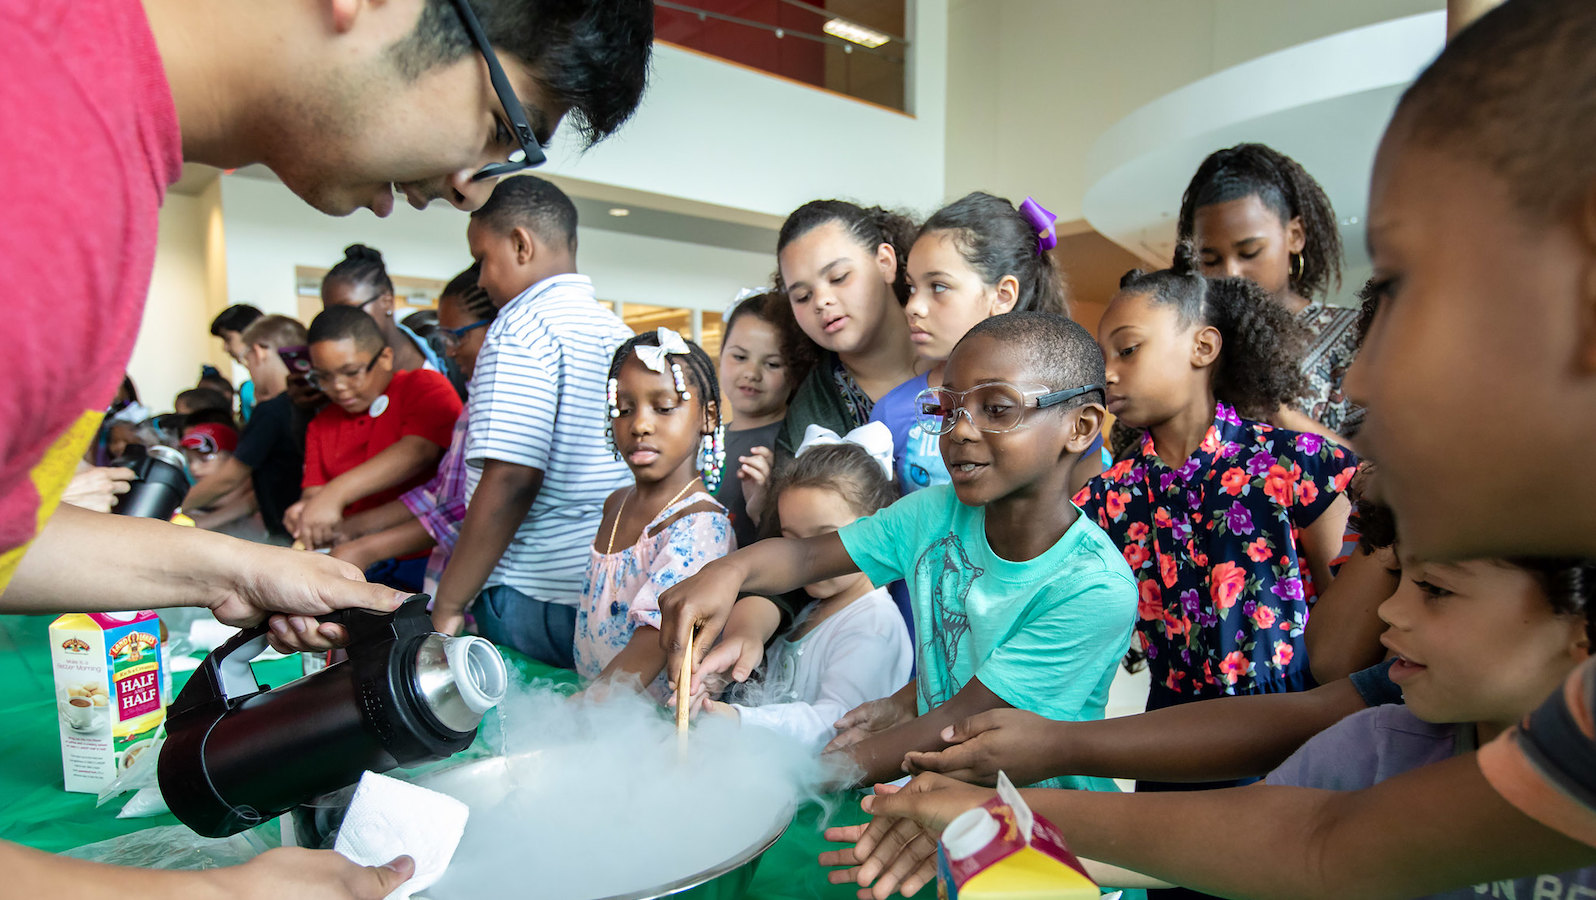 A group of young children stand in front of a silver bowl with steam coming out of it. One child stirs the steam with a spoon while wearing goggles while an adult pours liquid into the bowl.